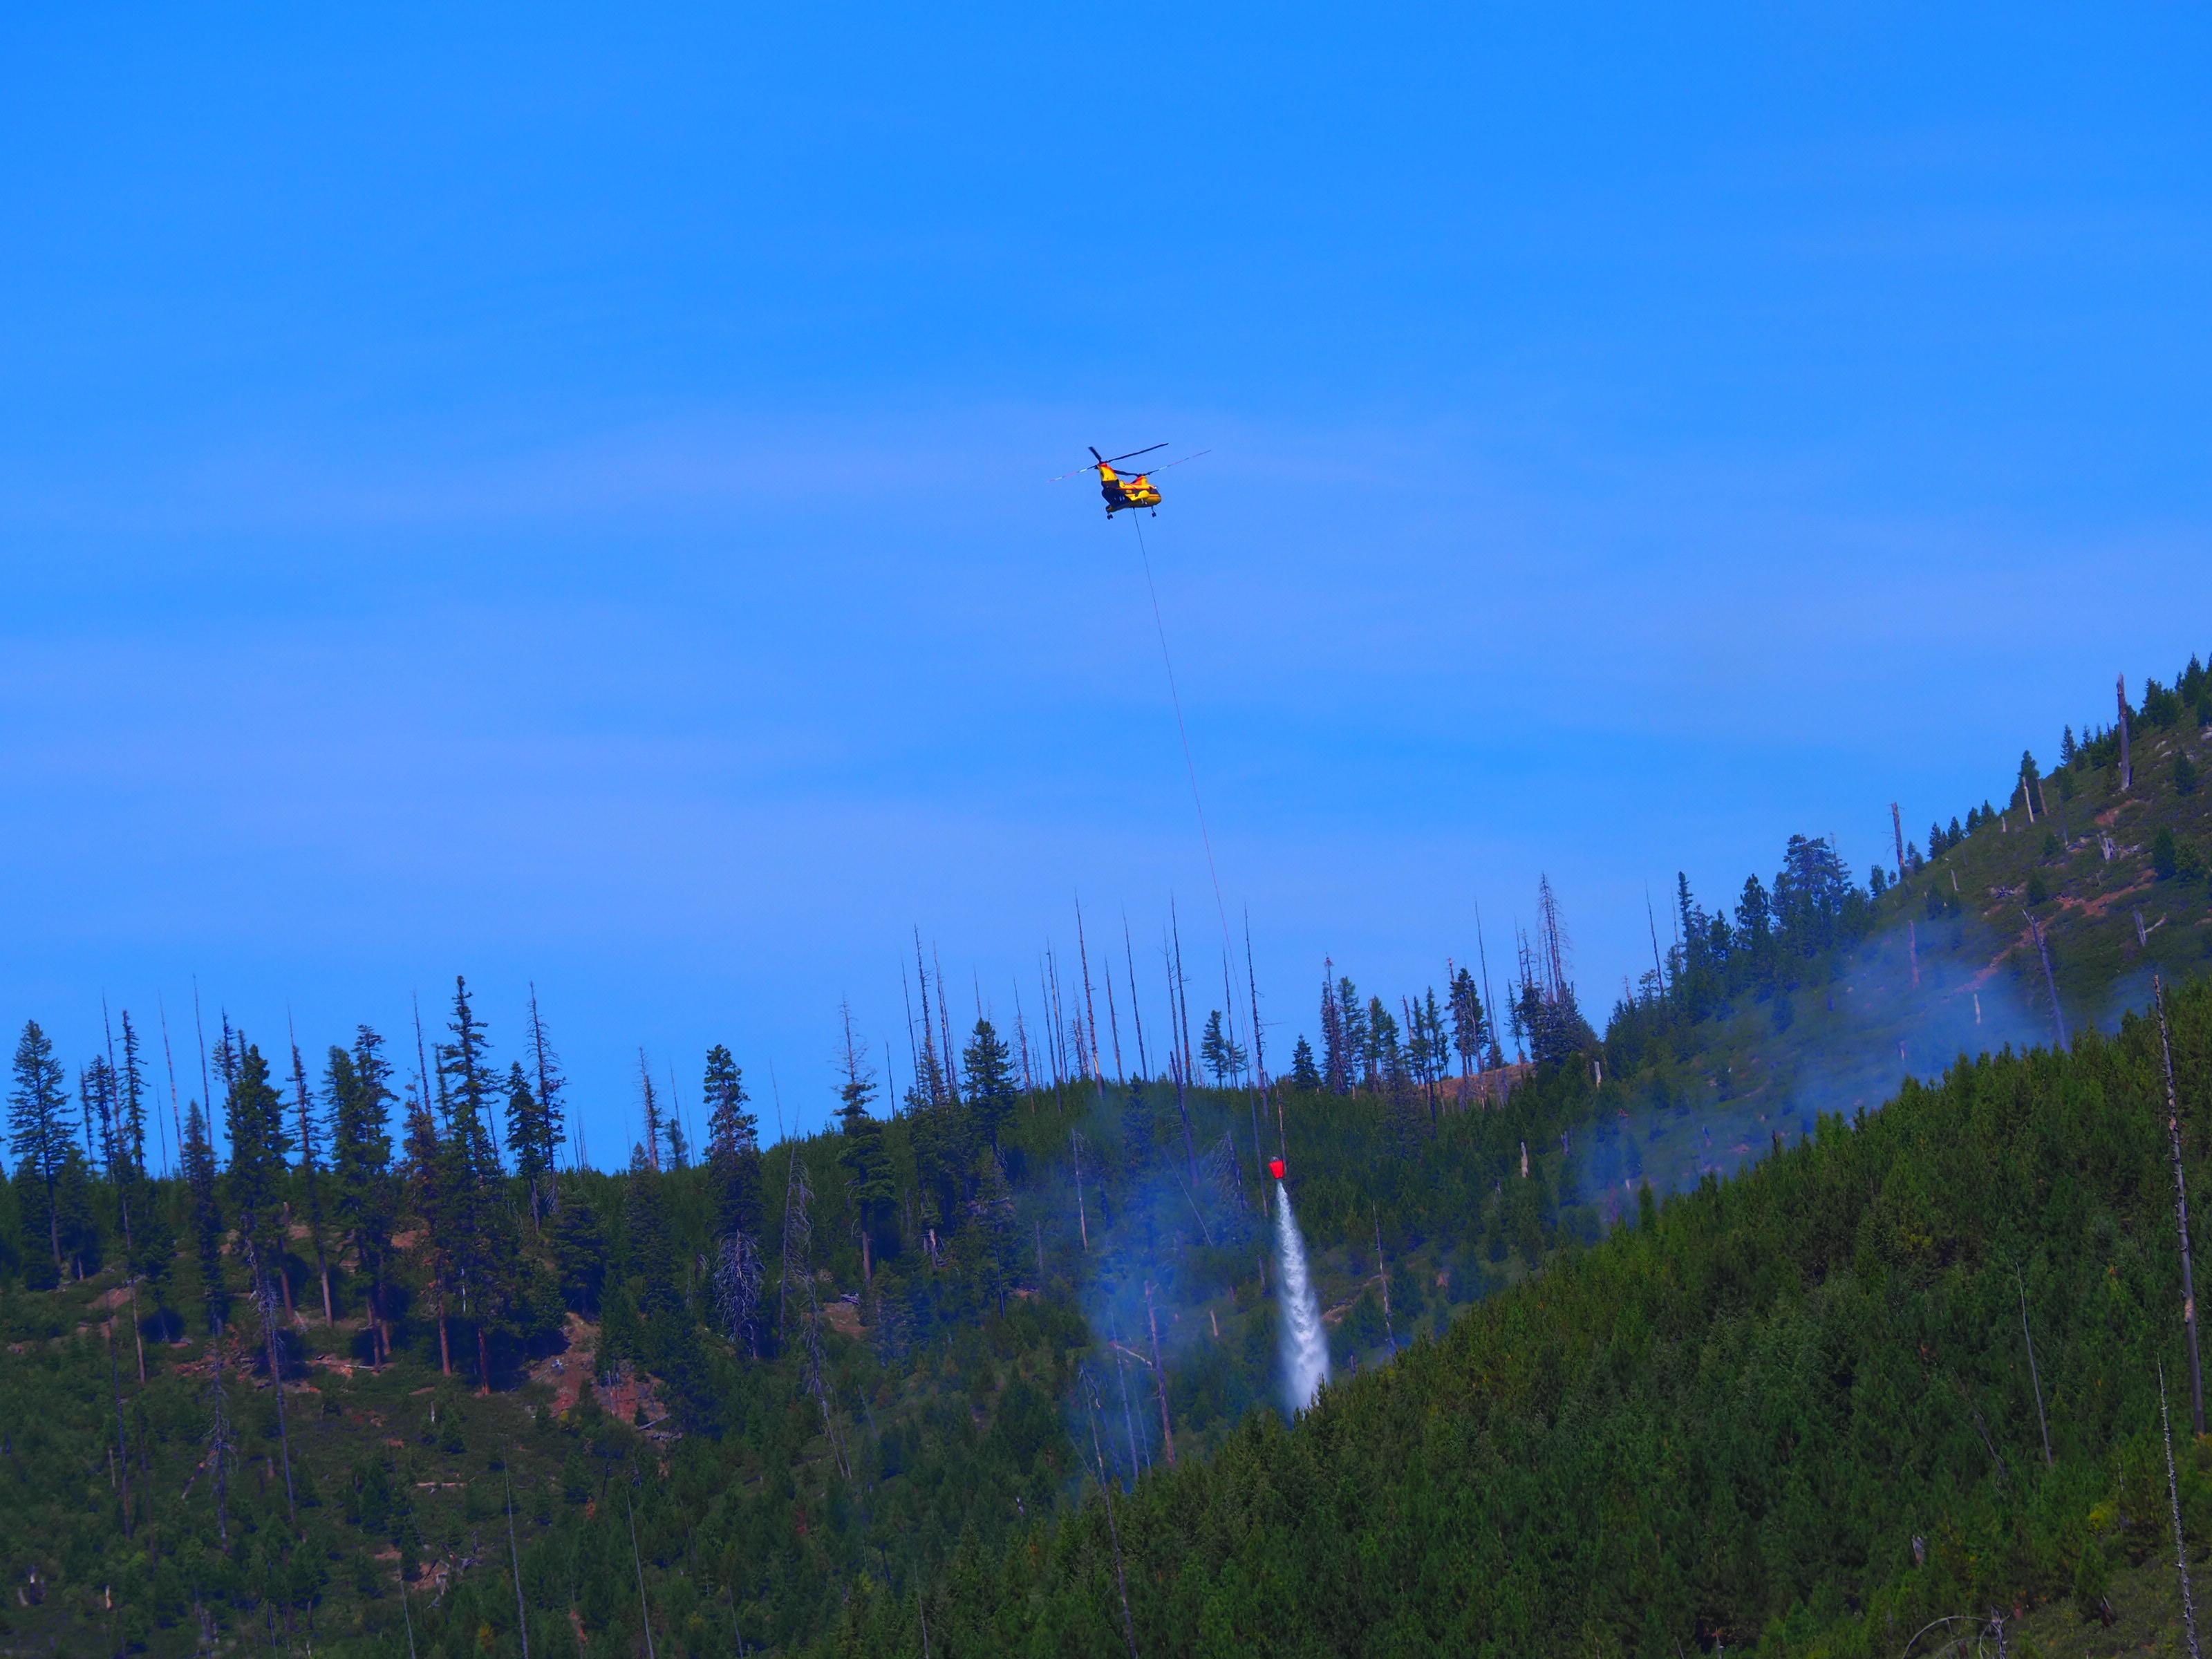 Helicopter working on cooling down hotspots